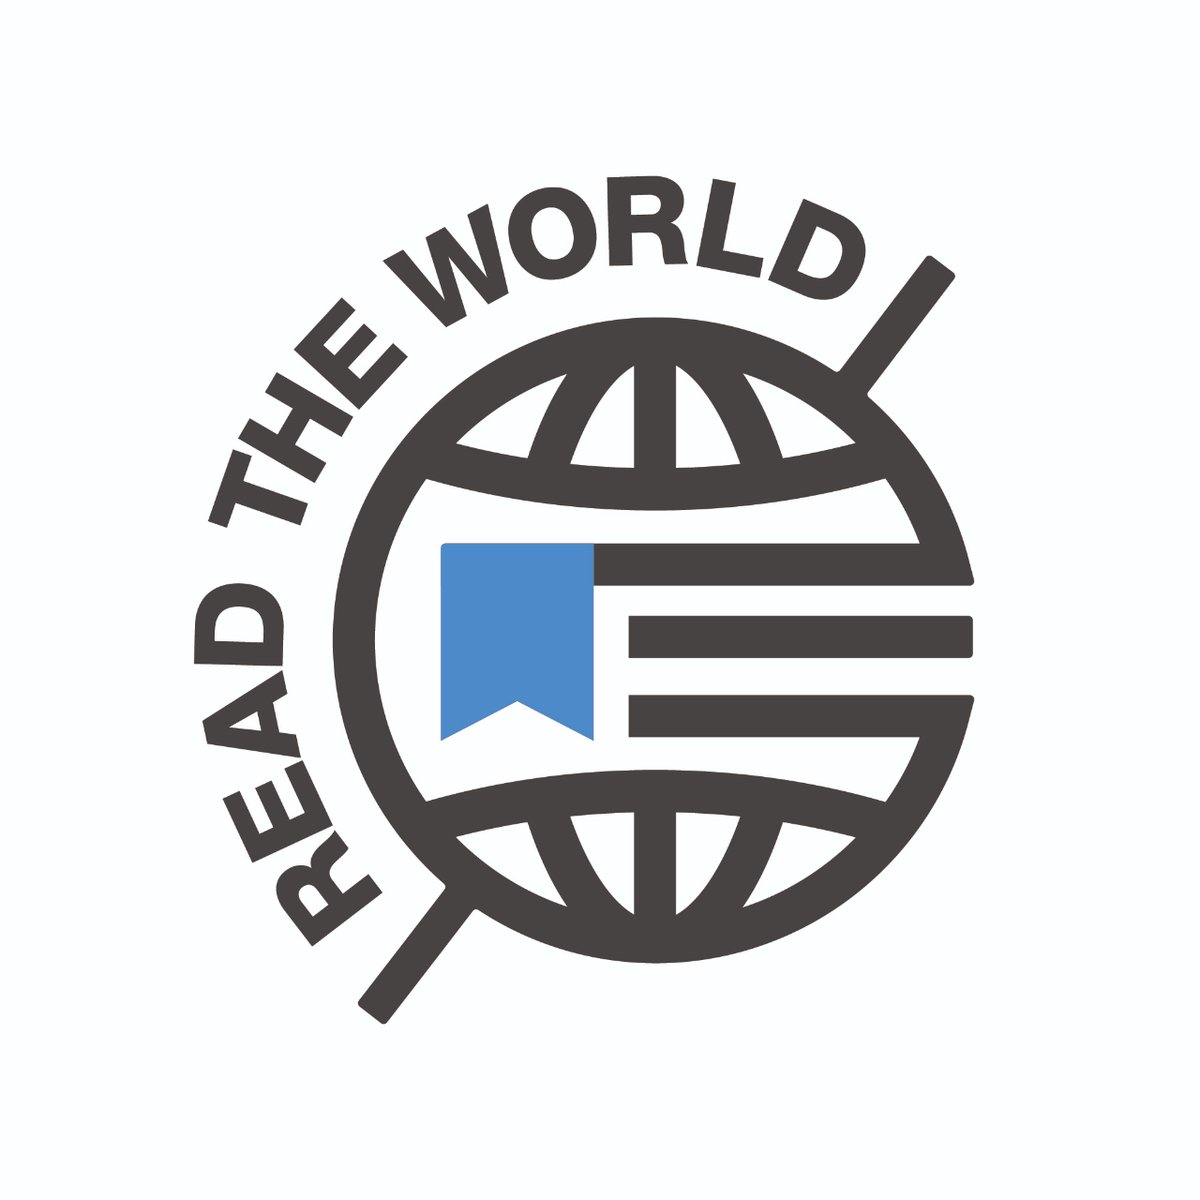 Join us and @LitTranslate for the 4th year of #ReadTheWorld, an online bookfair celebrating translators and their publishers! We’re proud to team up with many other publications for this celebration this year through 5/21.